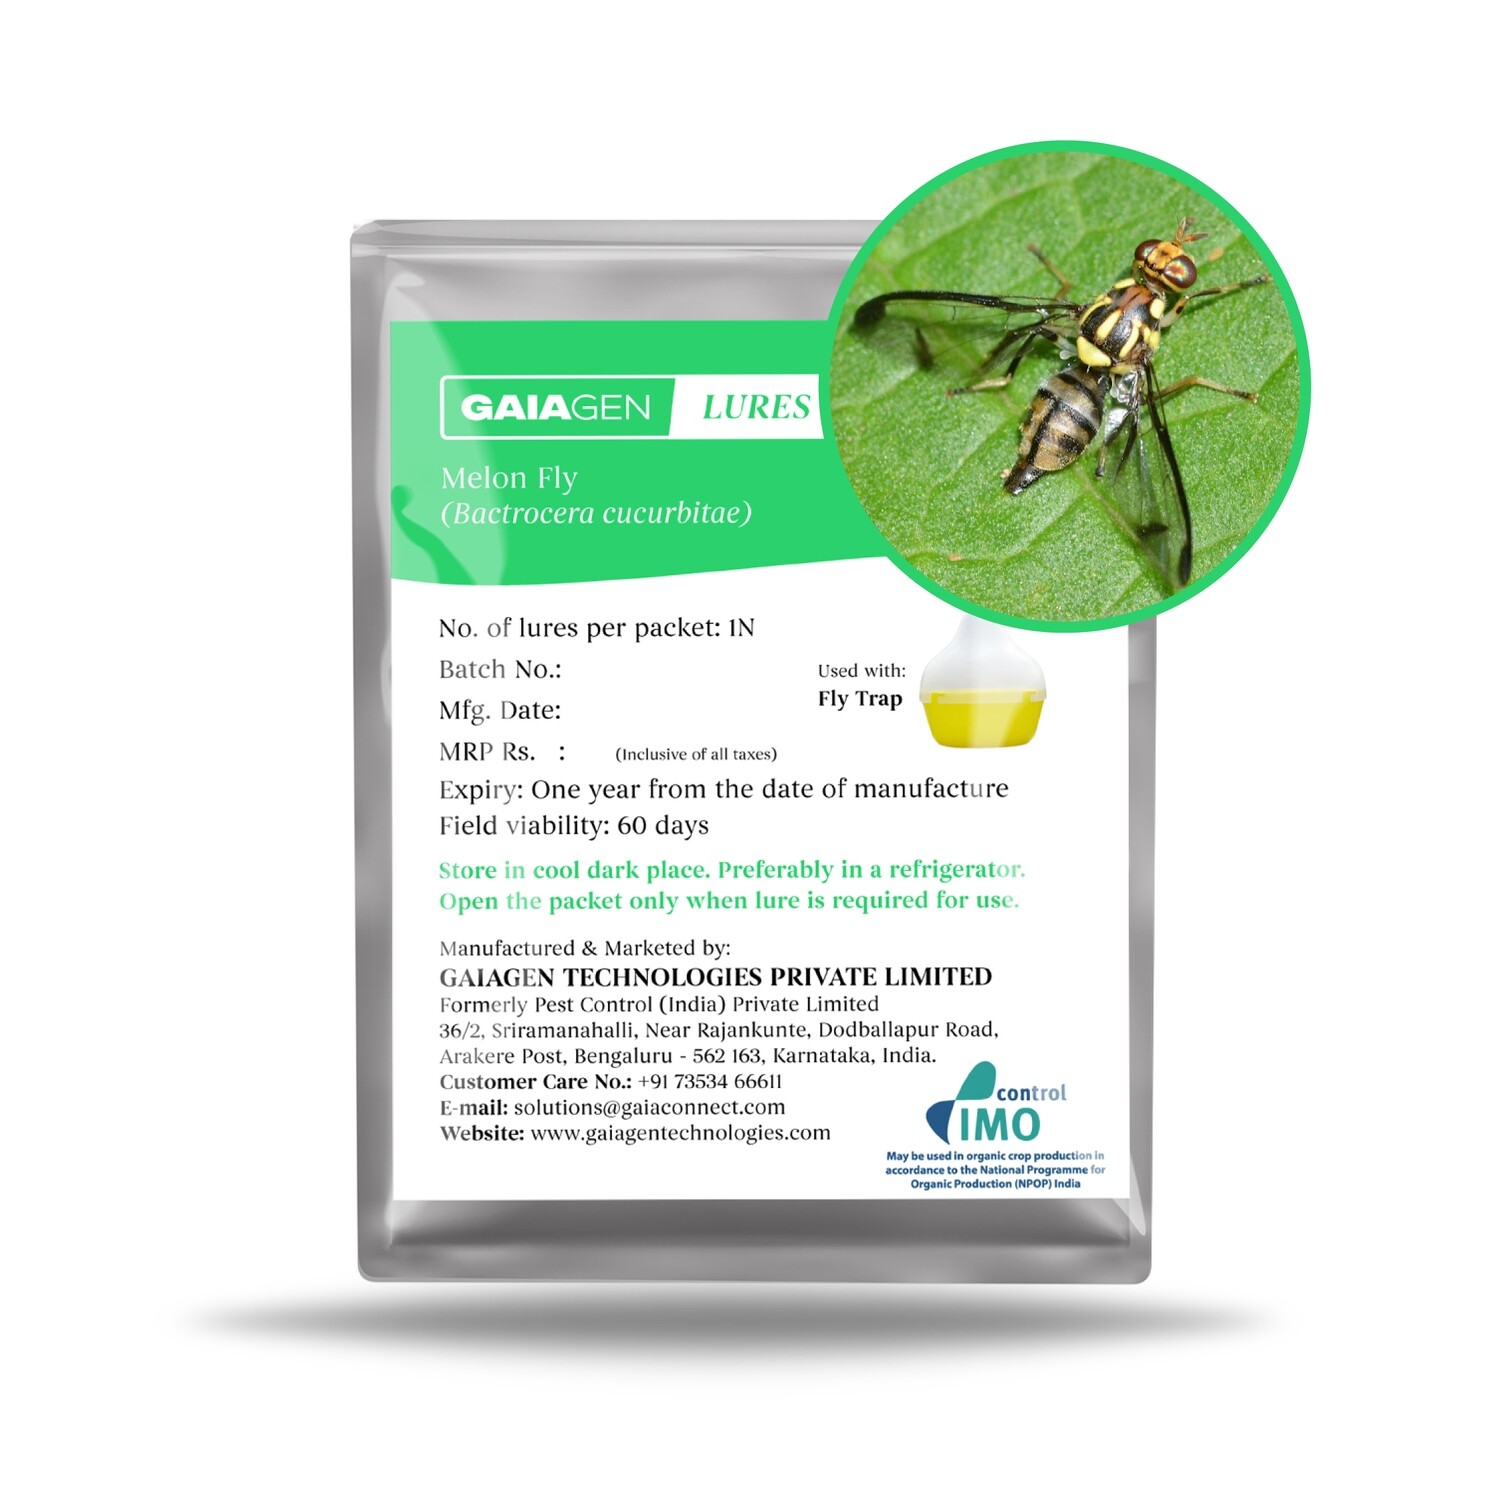 GAIAGEN Lures - Pheromone Lure for Melon Fly (Bactrocera cucurbitae) | Pack of 10 | (Does not Include Traps)